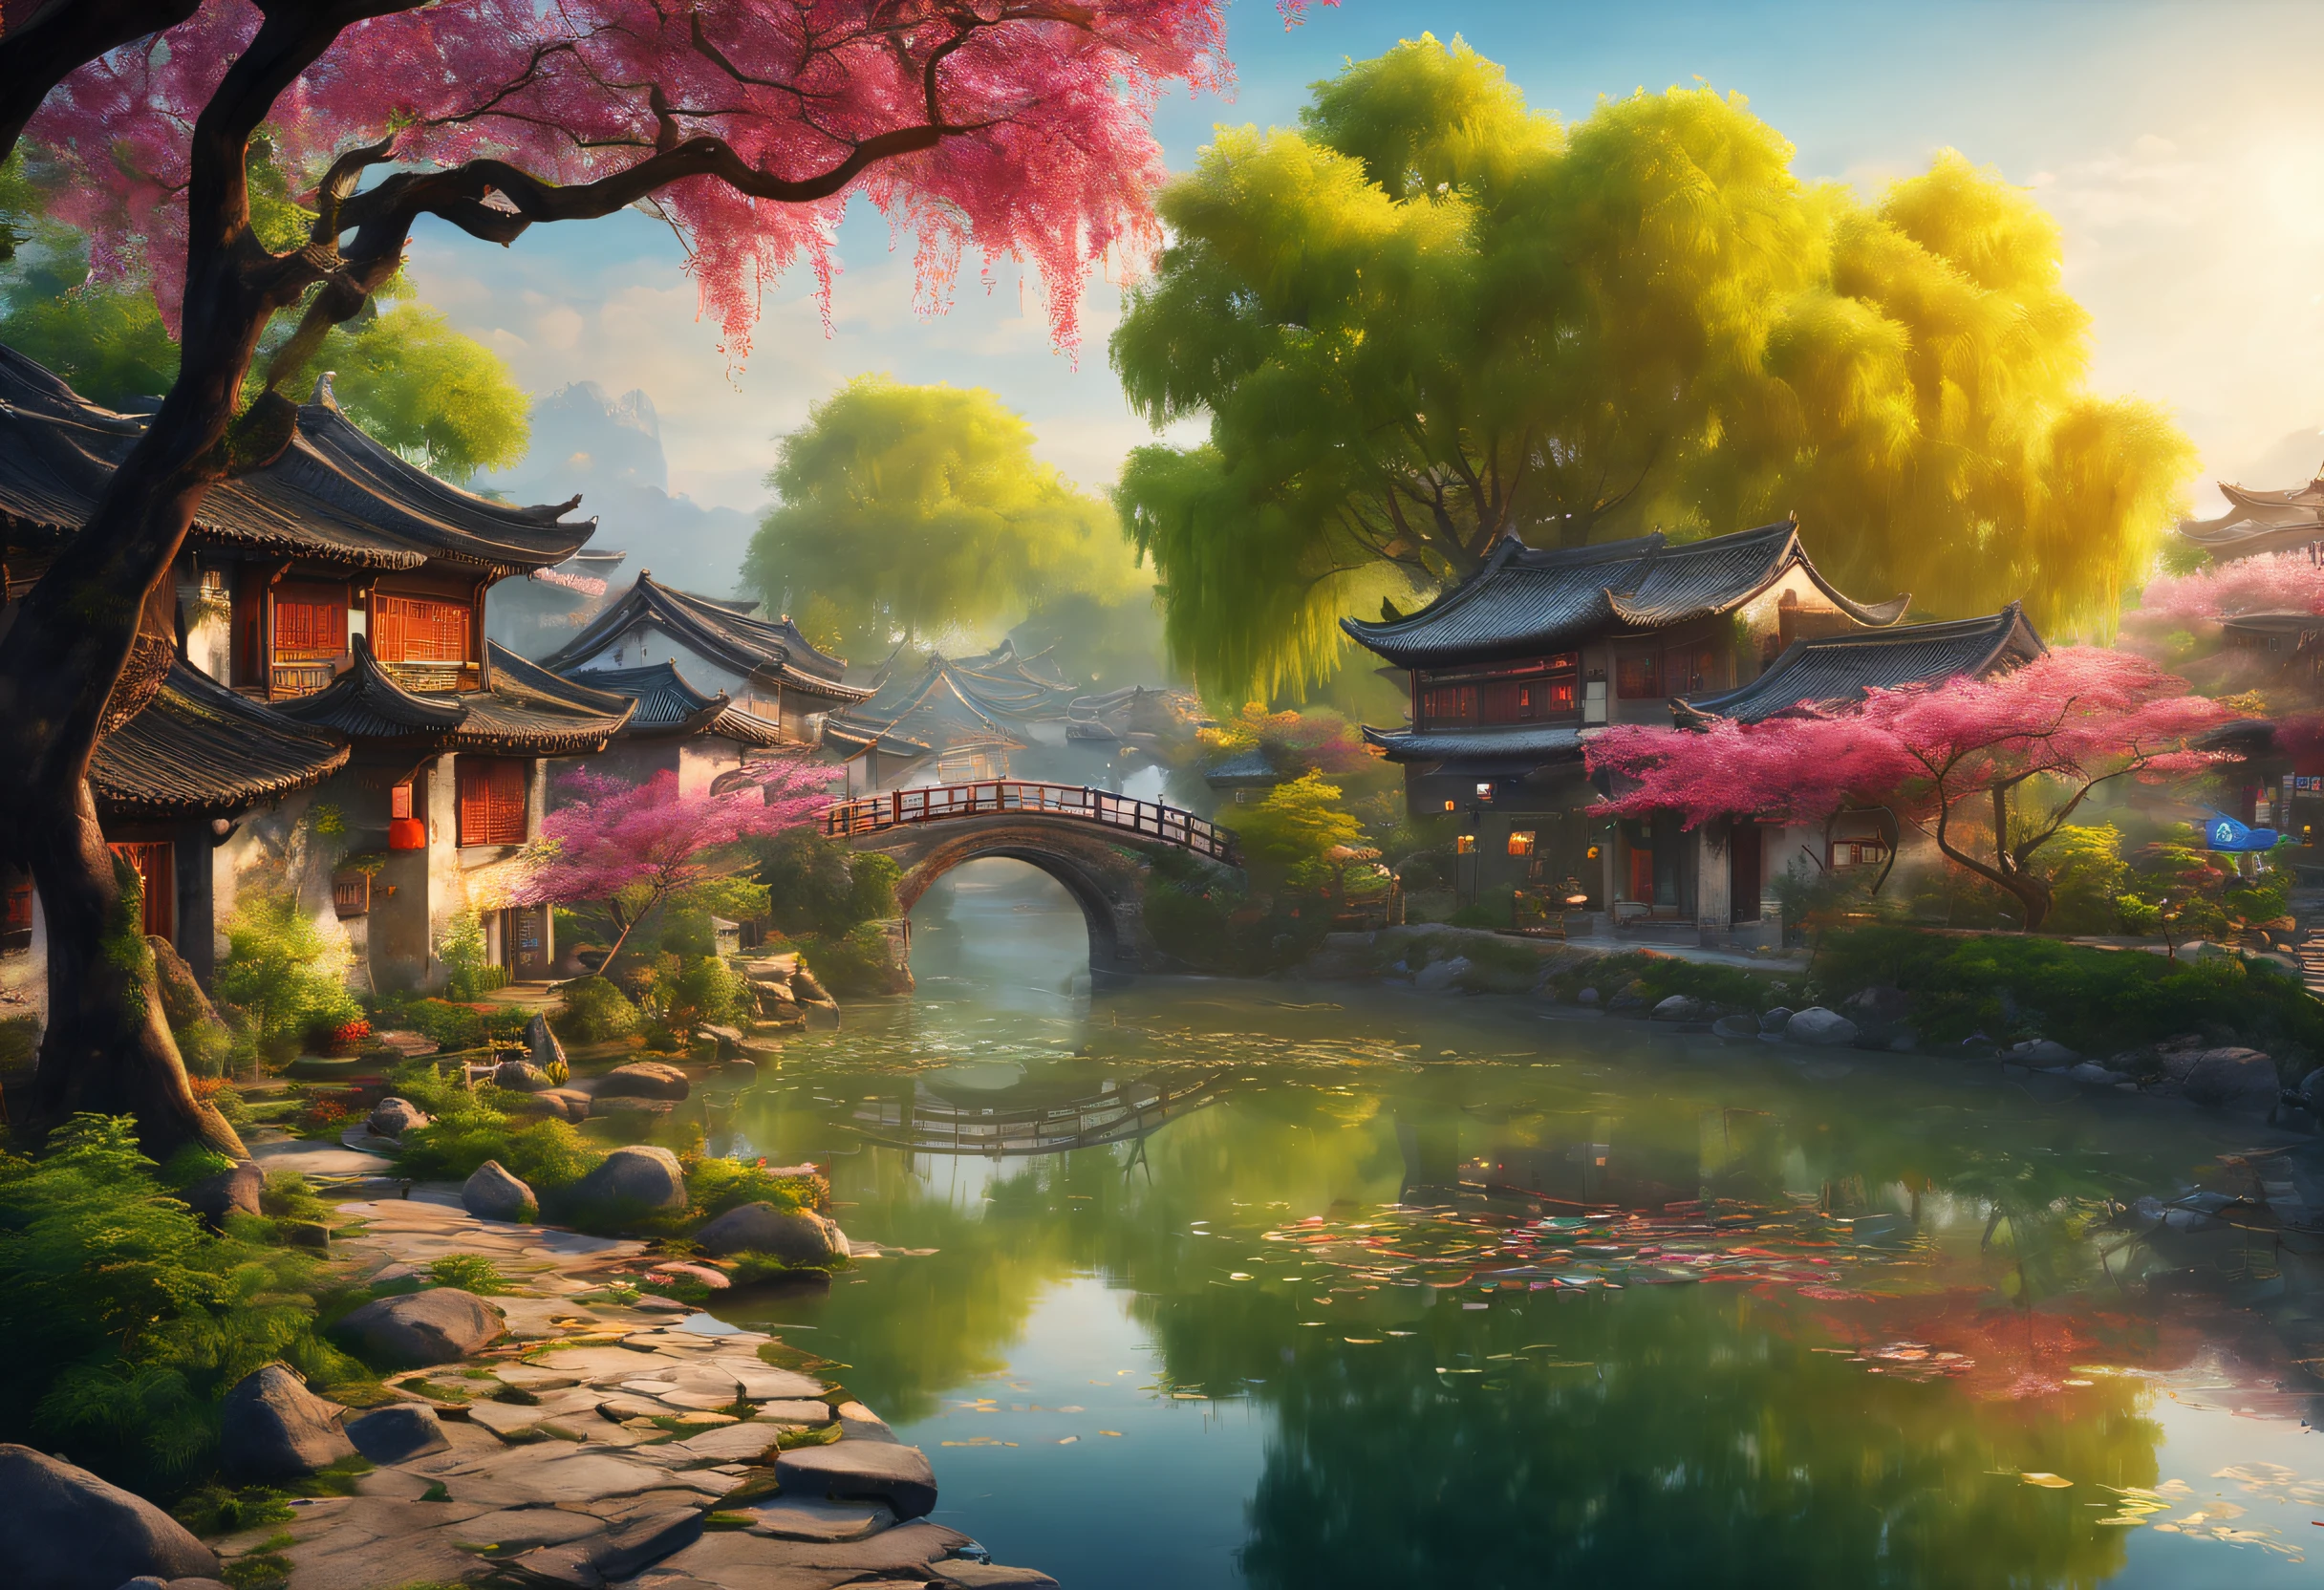 （vibrant with colors）, （Semi-realistic）, A vibrant riverside scene in ancient China, (Tranquil river water)Show on the(Elegant arch bridge)Oblivity, (Local villagers)'s(Picturesque residence), （Ming dynasty depiction：1.1）, Jiangnan Ancient Town, Small bridges and flowing water, Peaceful farmland outside the bustling city, （Sunny morning:1.2）, （fine brushwork：1.1）, Dynamic depiction, Panorama of the water's edge, Authentic atmosphere, Vivid authenticity, mesmerizing charm, Rich picture, 8K resolution, 1.4x realism, art deco, projected inset, Sony FE GM, Wide-Angle, super detail, best quality, highres